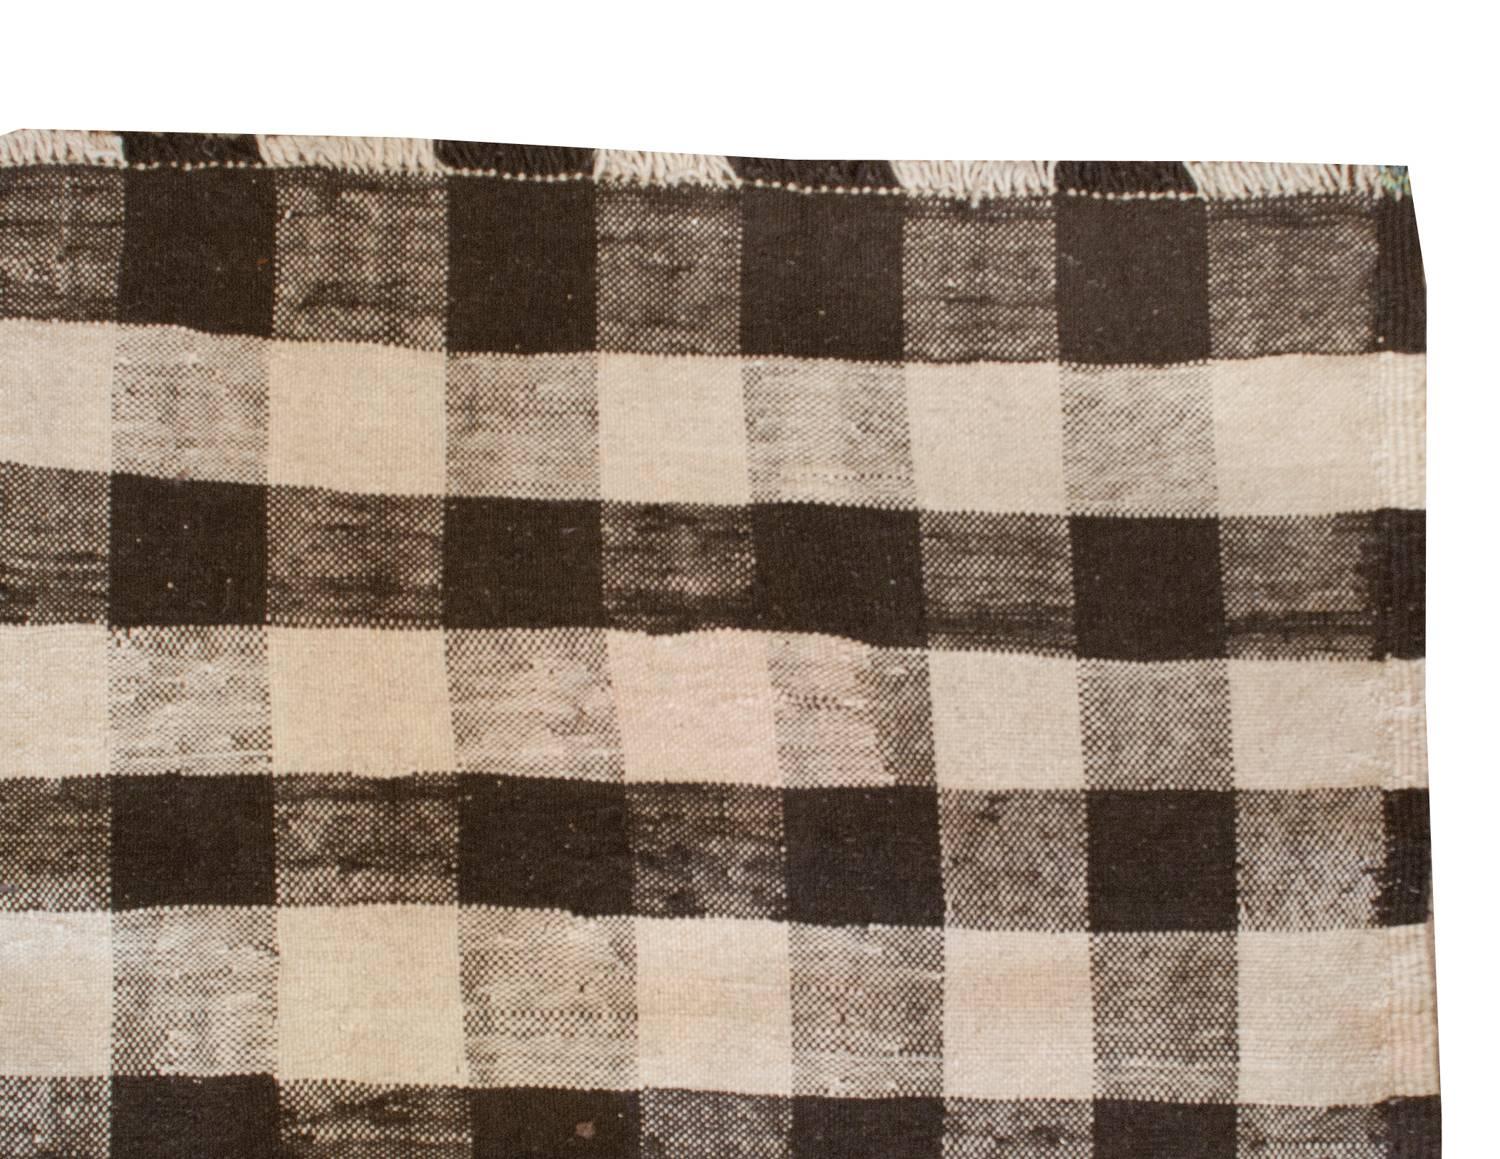 An extraordinary early 20th century Persian Ghashgaei Kilim runner with an unusual woven plaid pattern with natural, undyed, brown and cream colored wool.